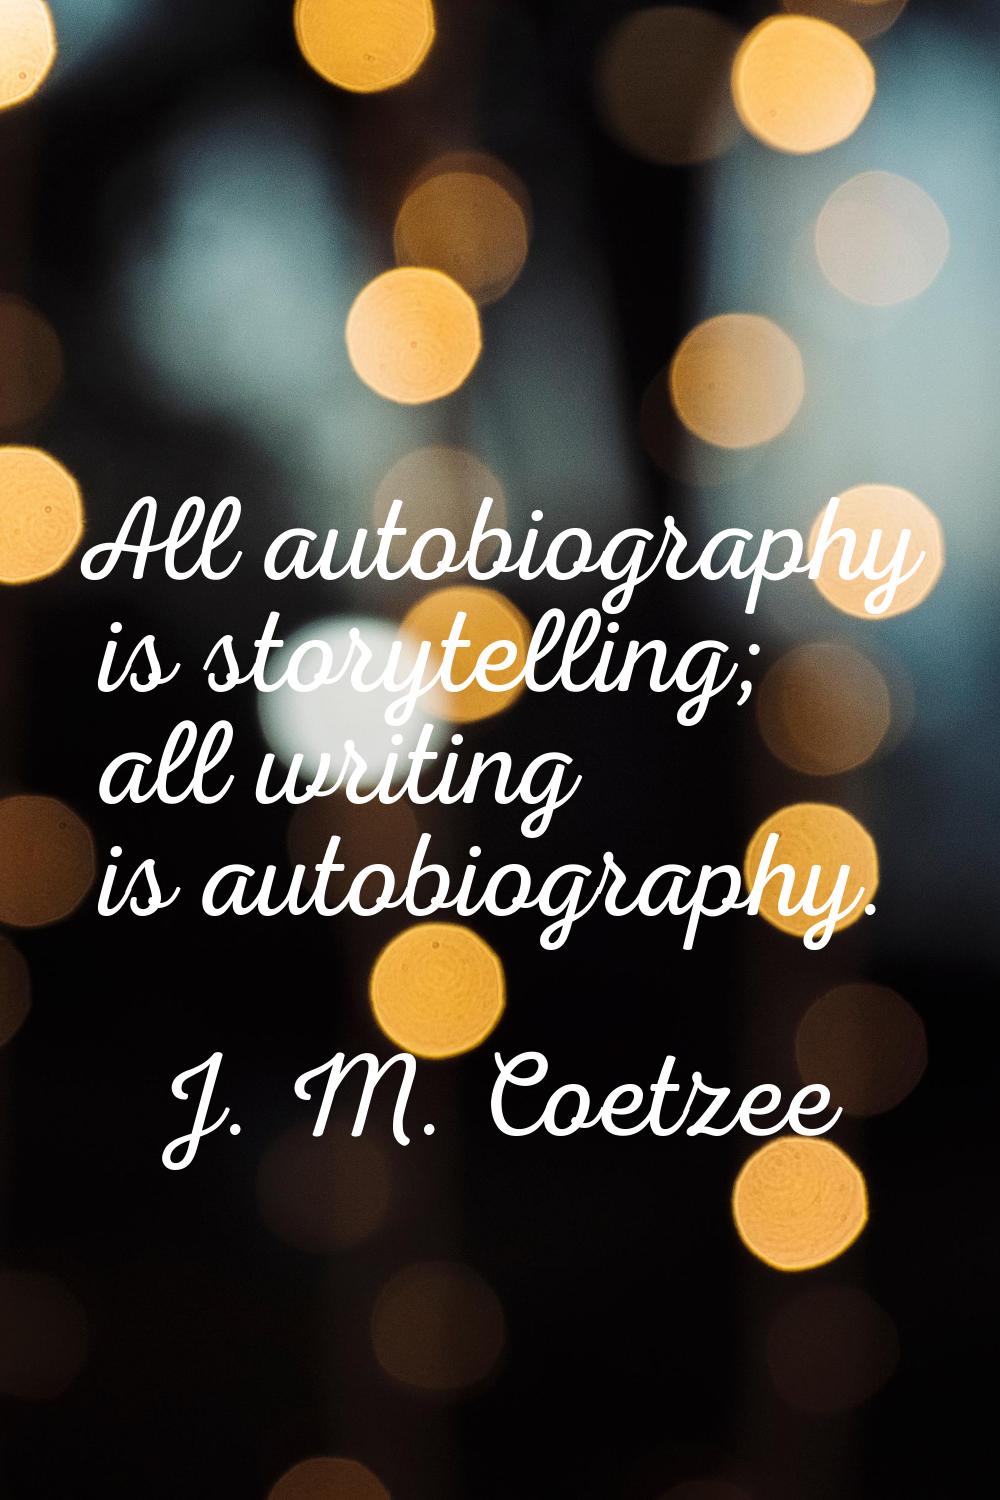 All autobiography is storytelling; all writing is autobiography.